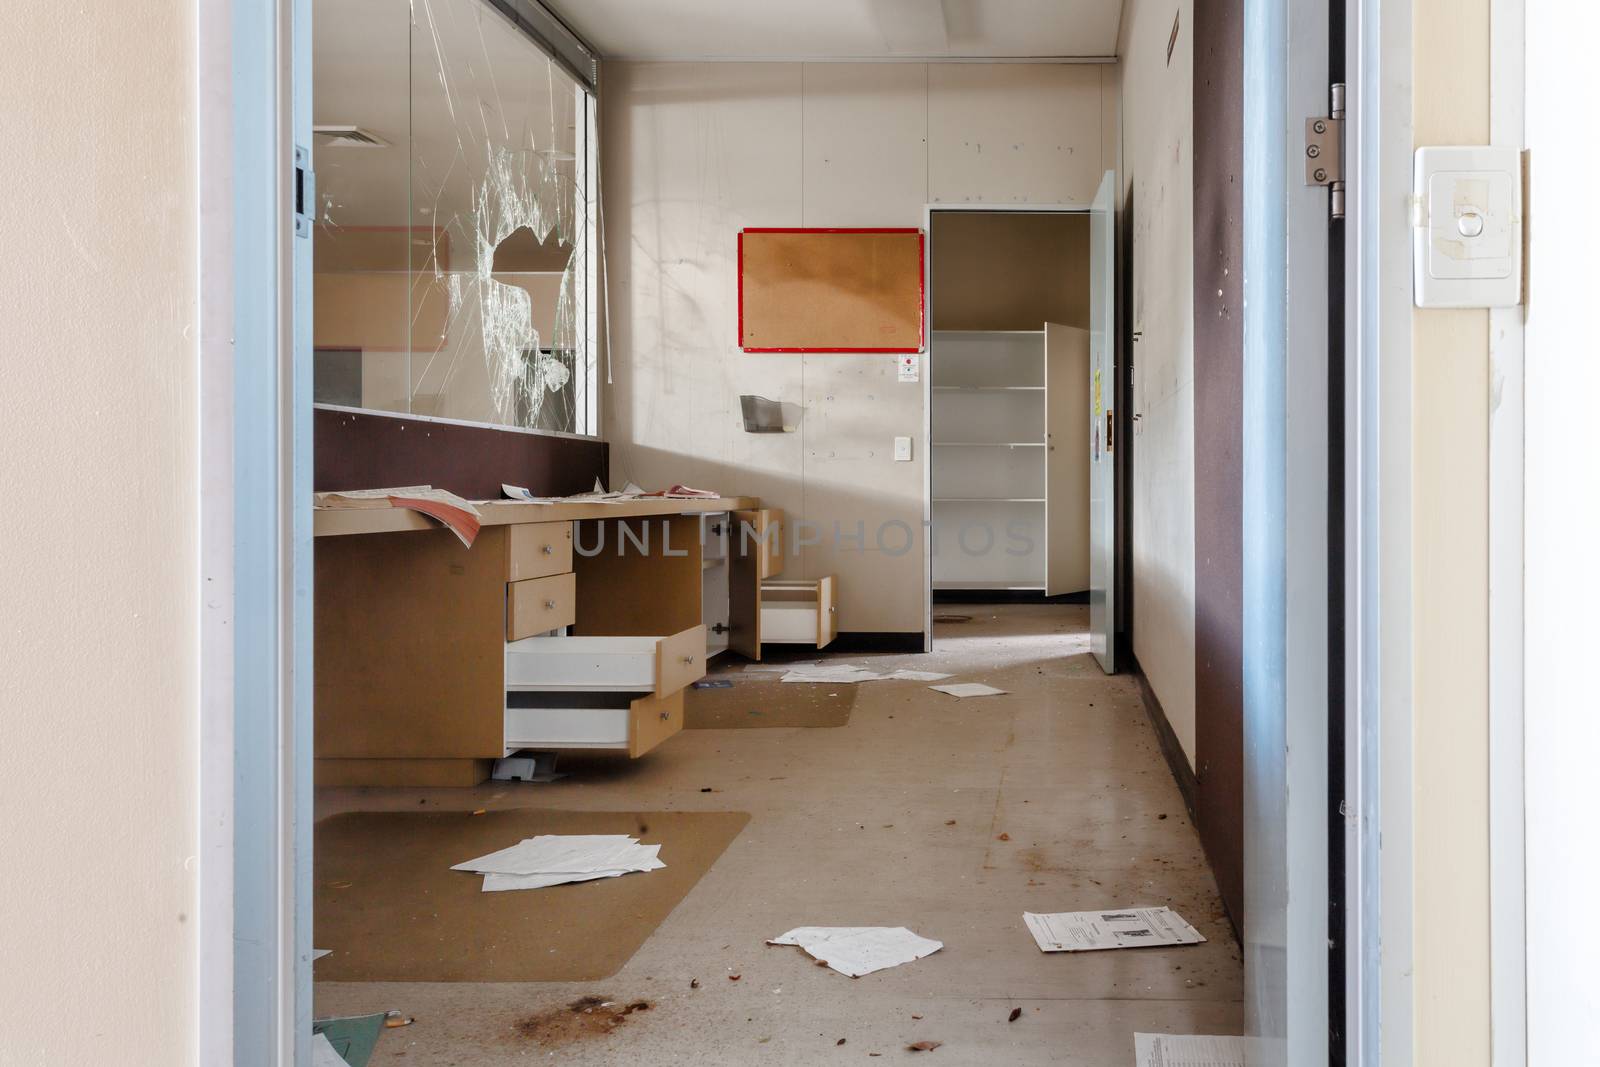 Vandalised reception office area of an abandoned building.  Protective glass windows smashed blue tack on walls, drawers and filing cabinets left open, paper on floor.